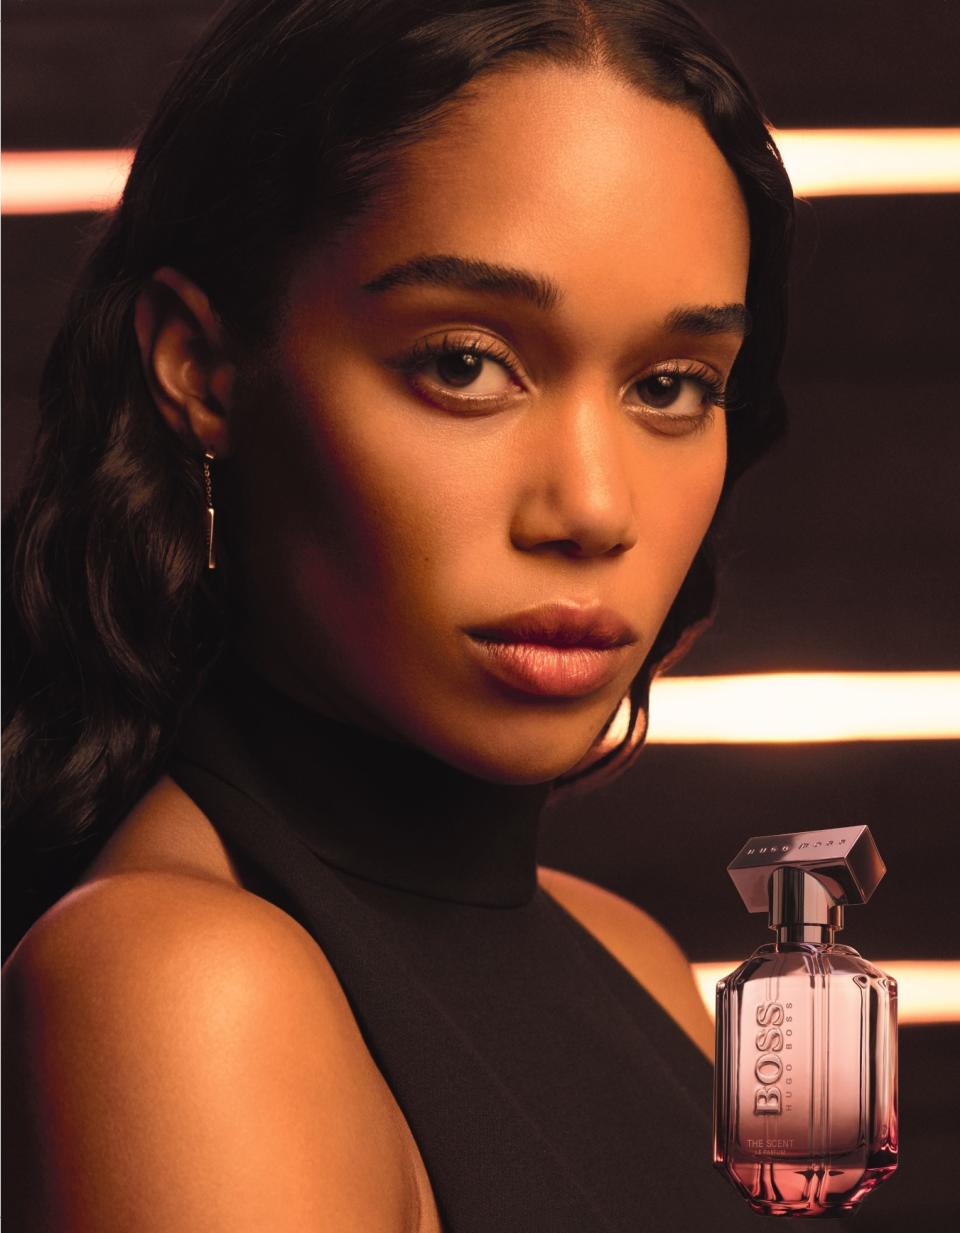 Laura Harrier in the new Boss The Scent campaign. - Credit: Courtesy Image